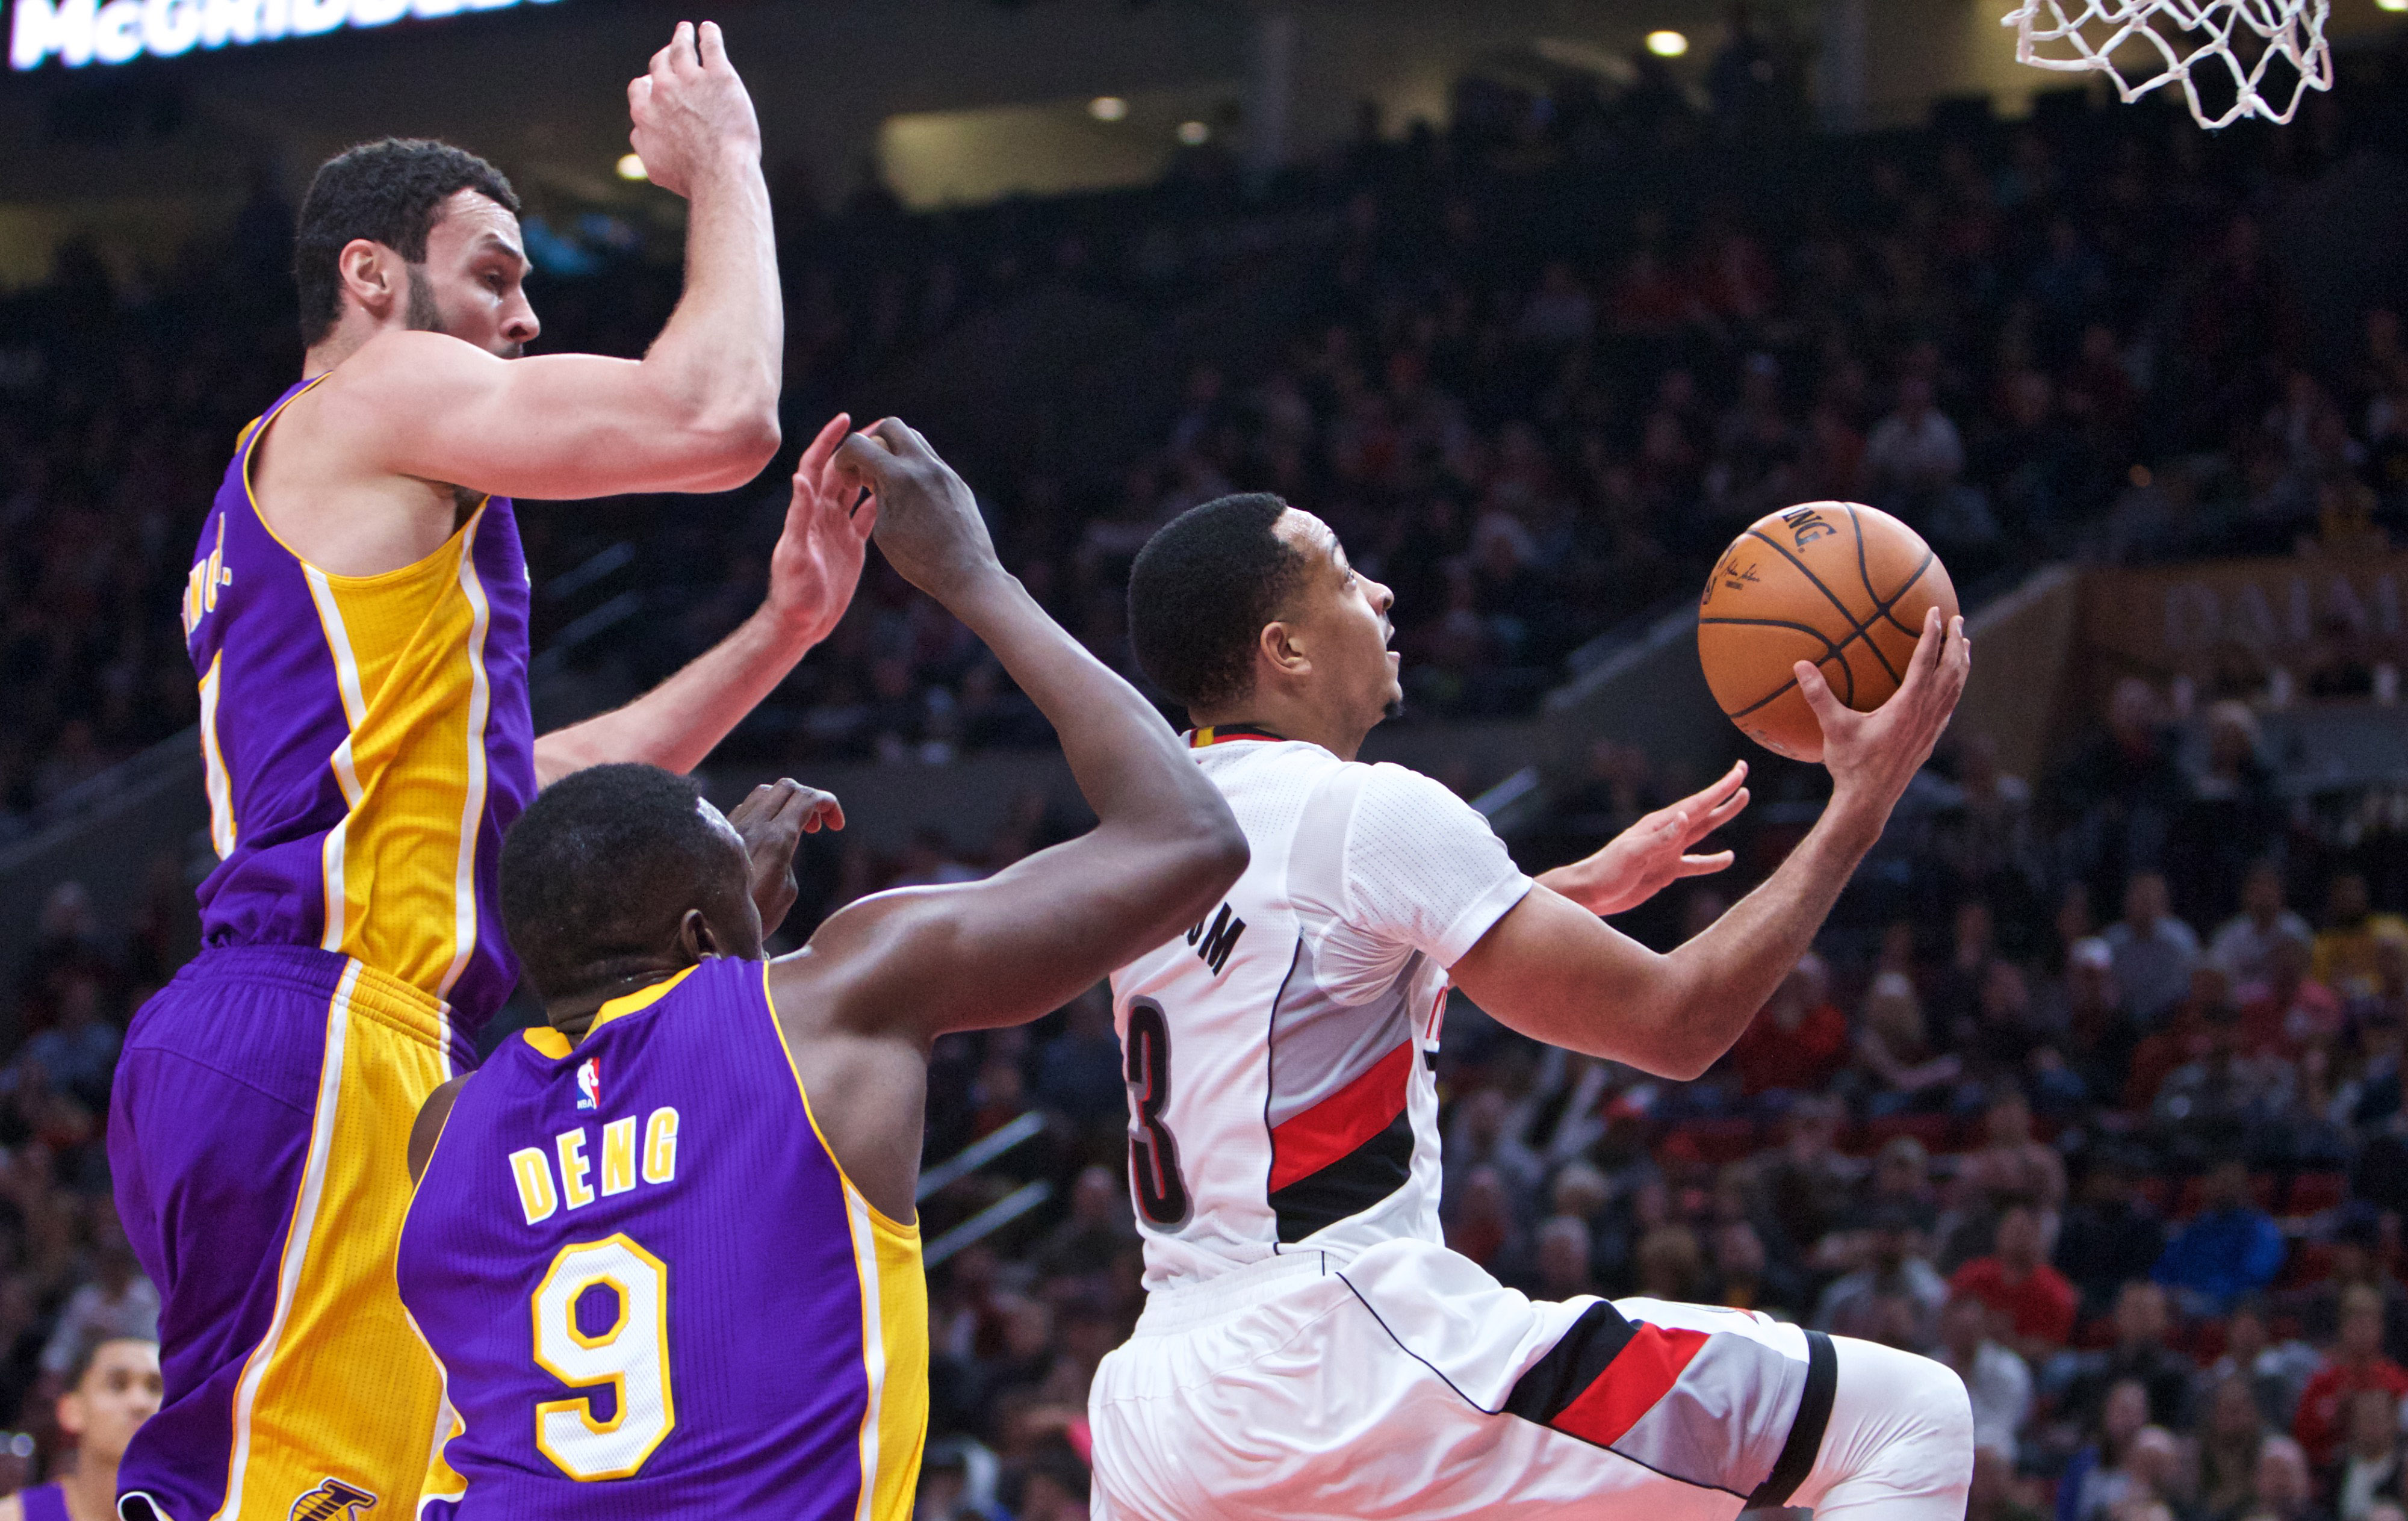 Trail Blazers at Lakers live stream: How to watch online